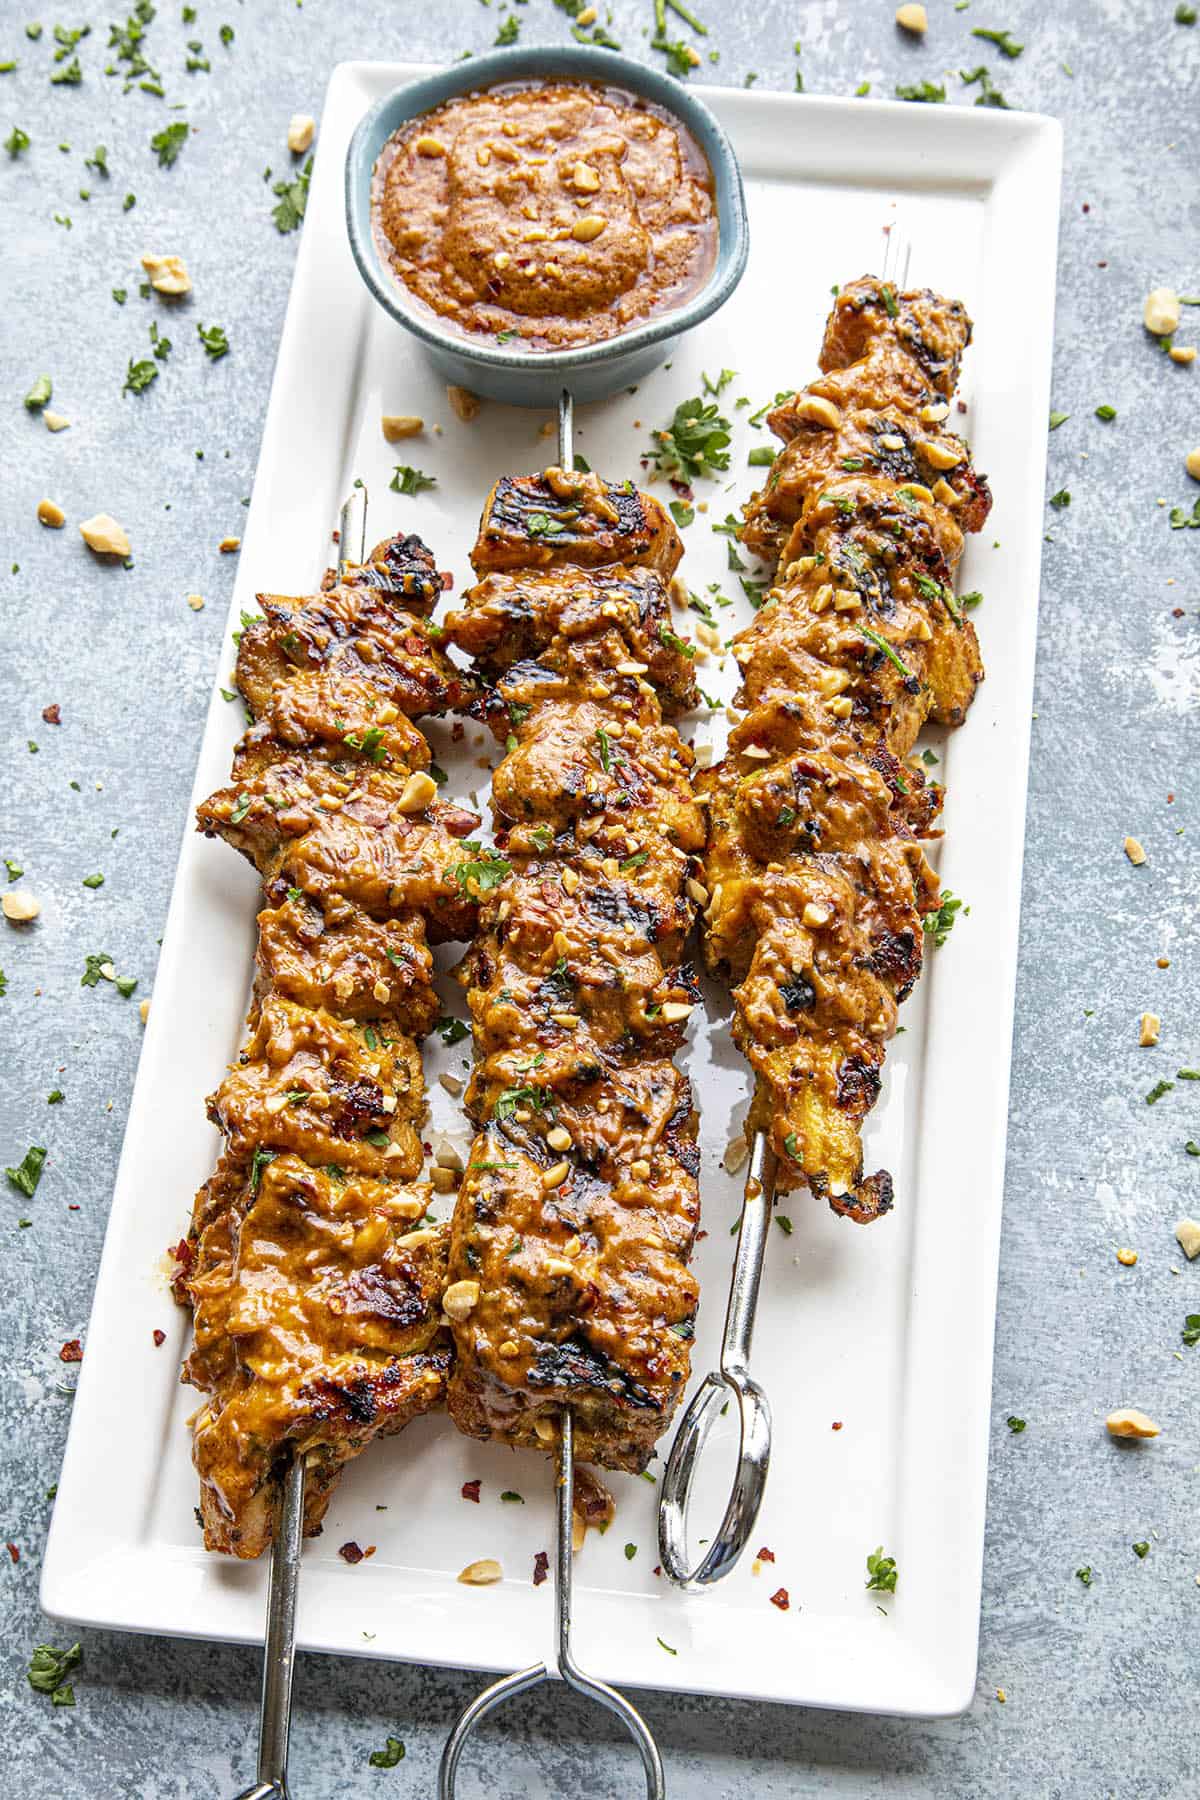 Thai Chicken Satay skewers on a plate, slathered with spicy Thai peanut sauce